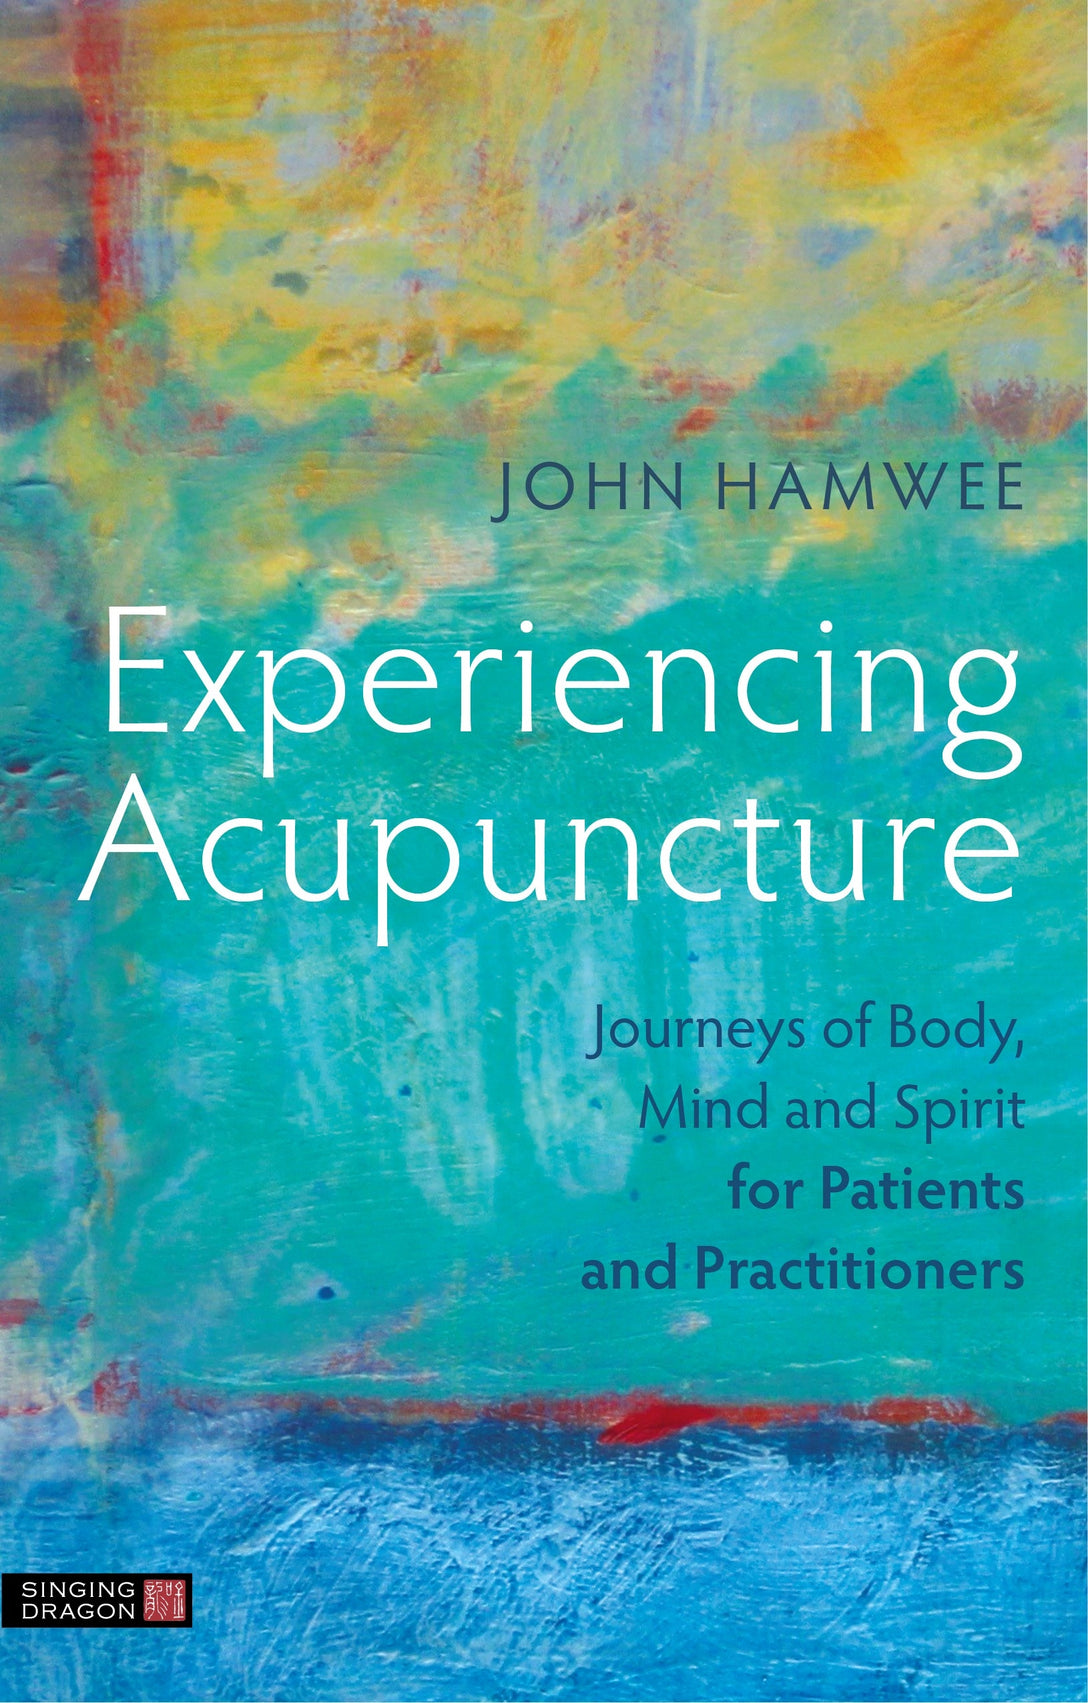 Experiencing Acupuncture by John Hamwee